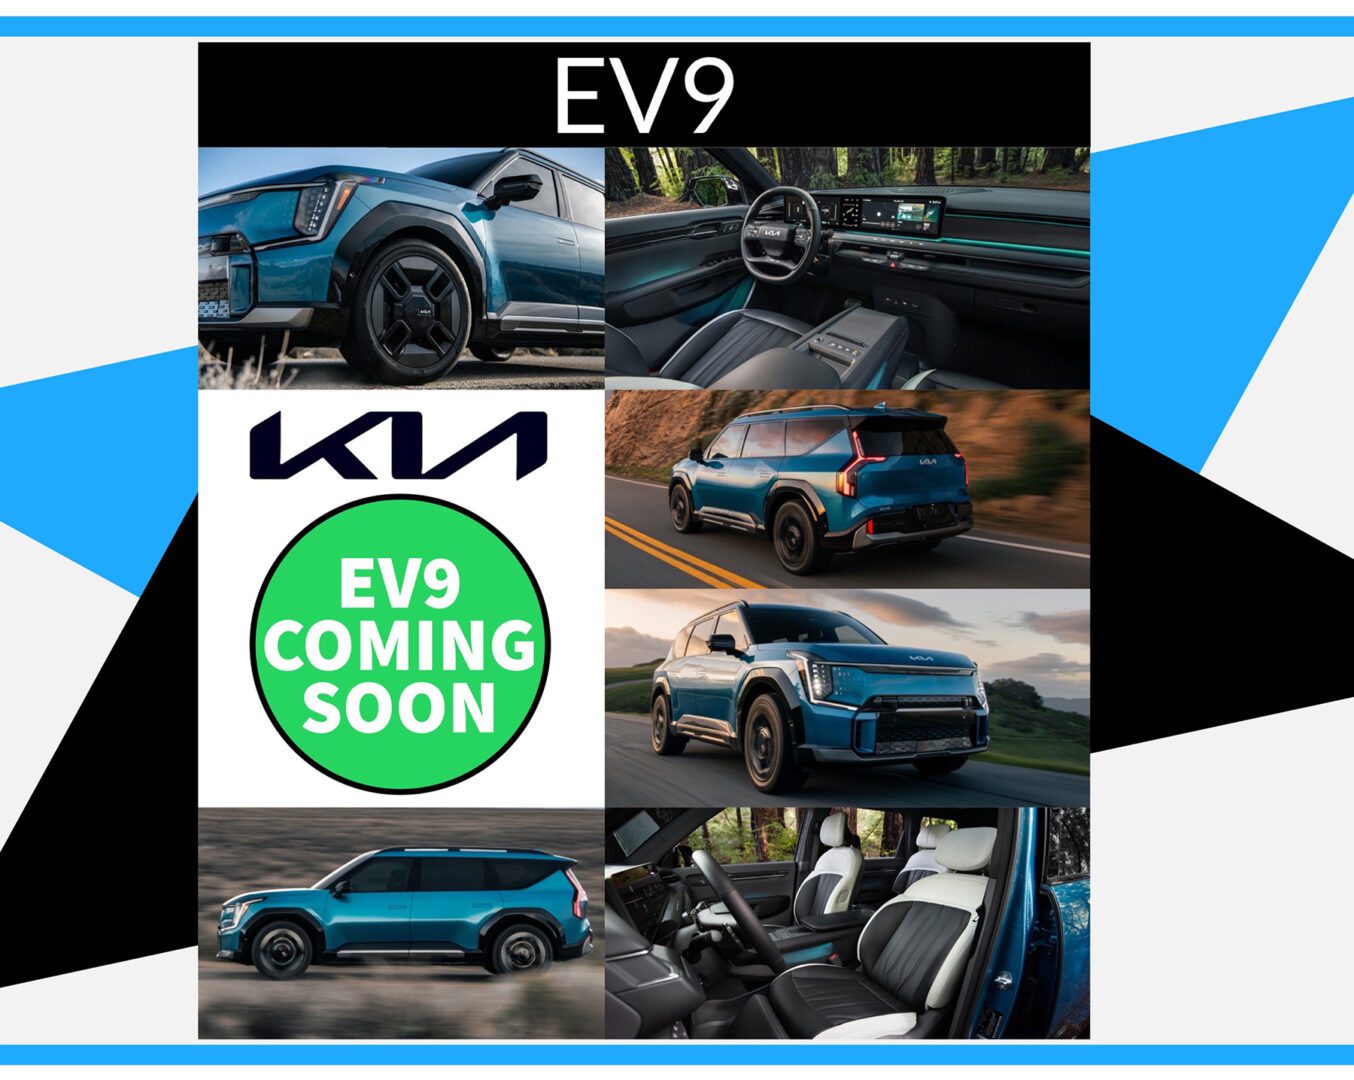 The ev9 is coming soon poster.